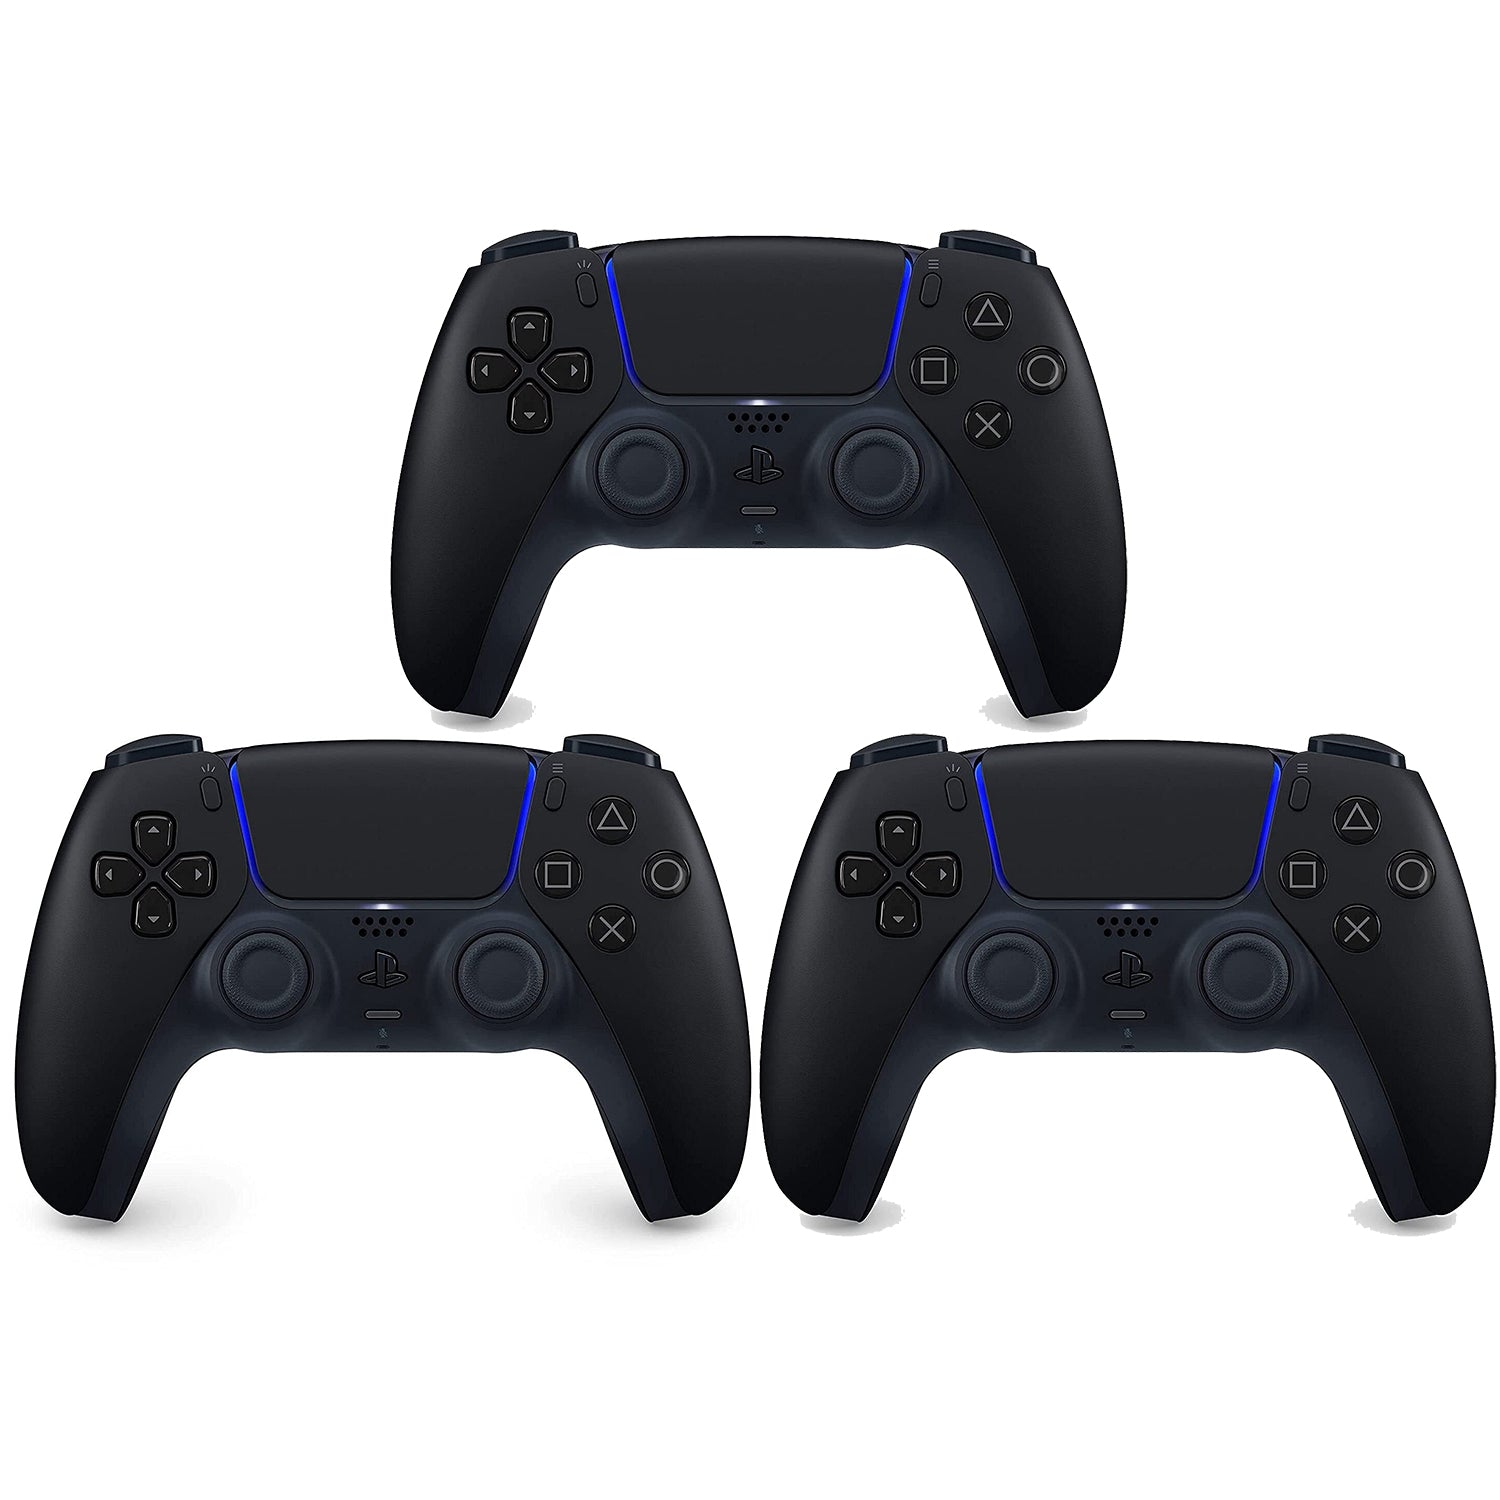 Nictus Namibia on X: Sony Playstation 5 Digital Edition [ Bundle Deal]  Price: N$ 16790.00 Bundle Includes: 1x Extra PS5 DualSense Wireless  Controller, Midnight Black 1x PS5 Pulse 3D Wireless Headset